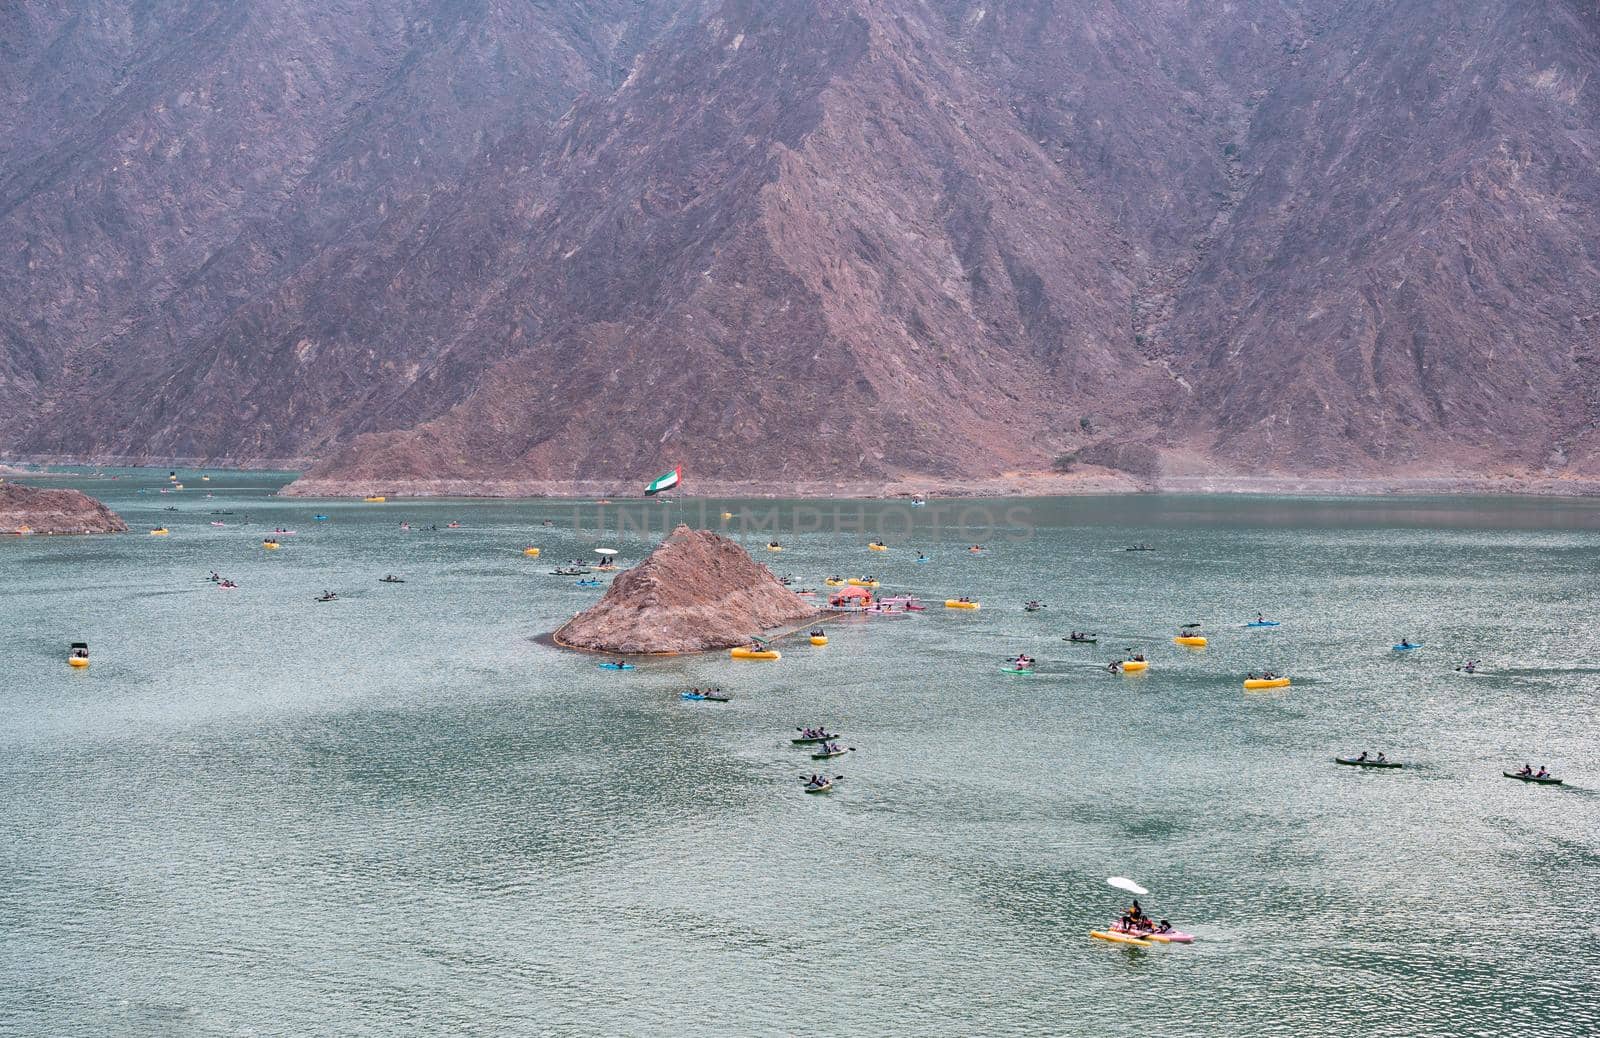 BEAUTIFUL AERIAL VIEW OF THE PADDLE BOATS, KAYAKS IN THE HATTA WATER DAM ON A CLOUDY DAY AT SUNSET TIME IN THE MOUNTAINS ENCLAVE REGION OF DUBAI, UNITED ARAB EMIRATES. by sriyapixels